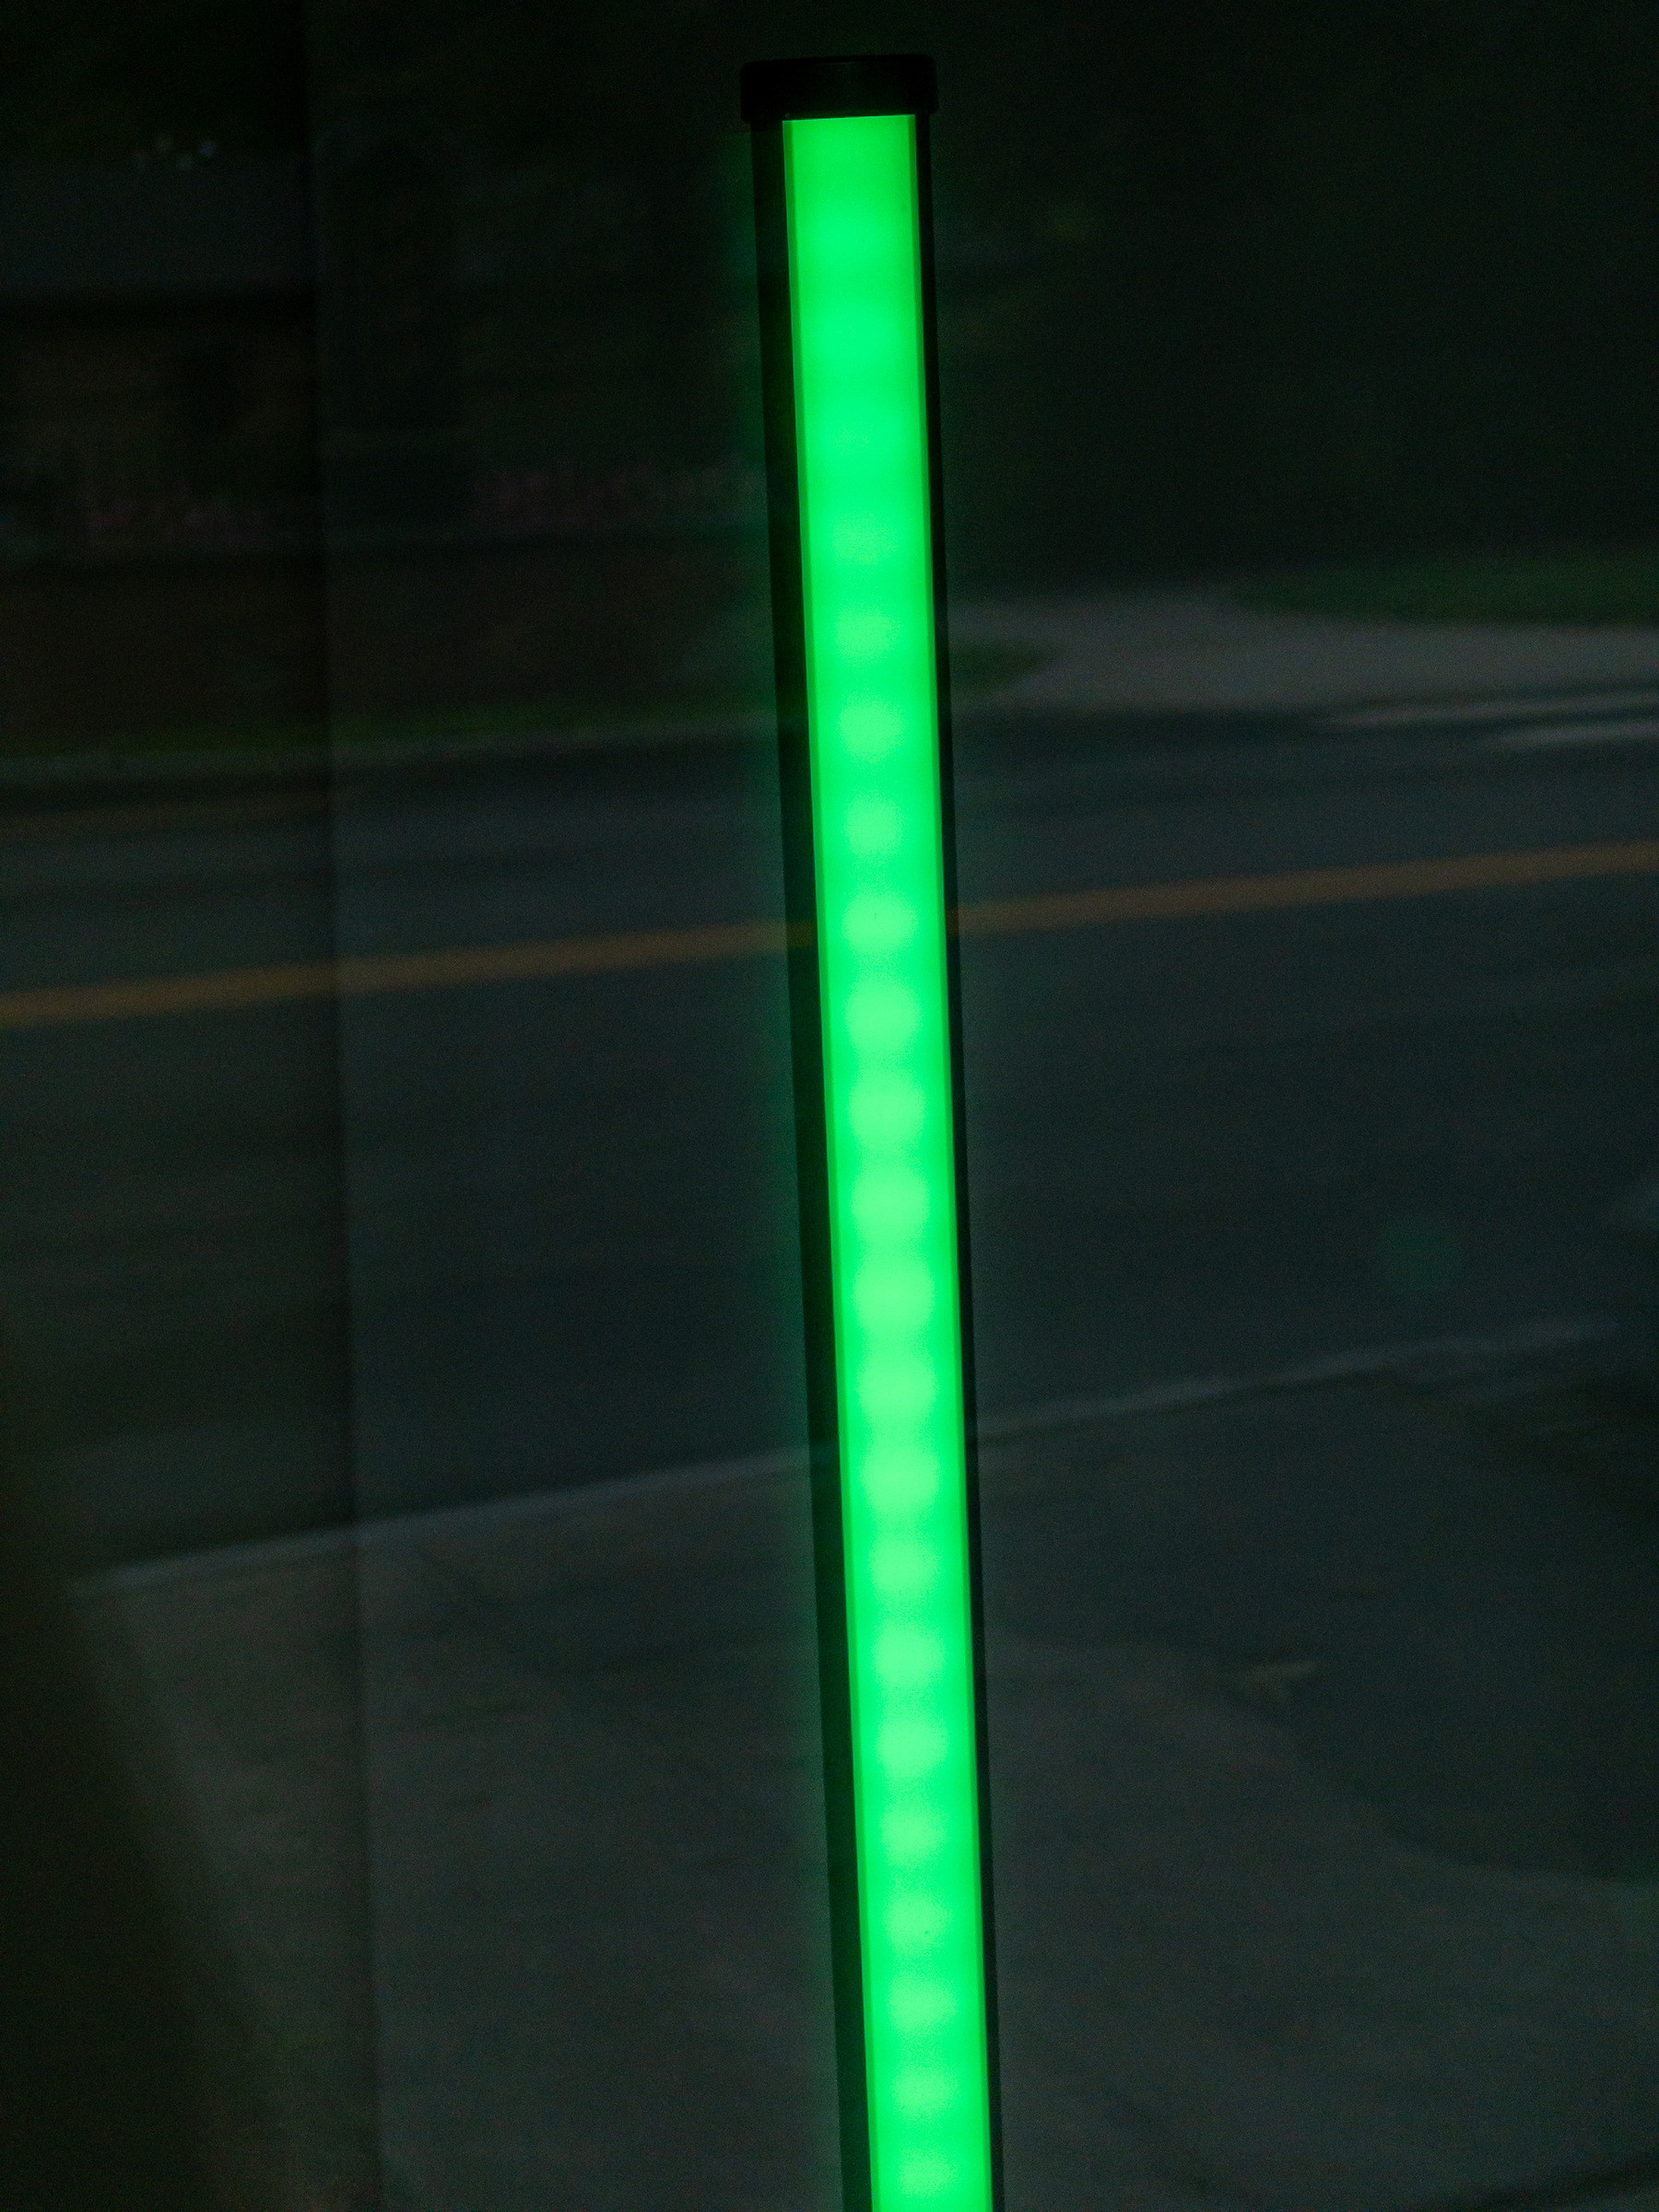 Green light tube in a shop window with reflection of street in the background.